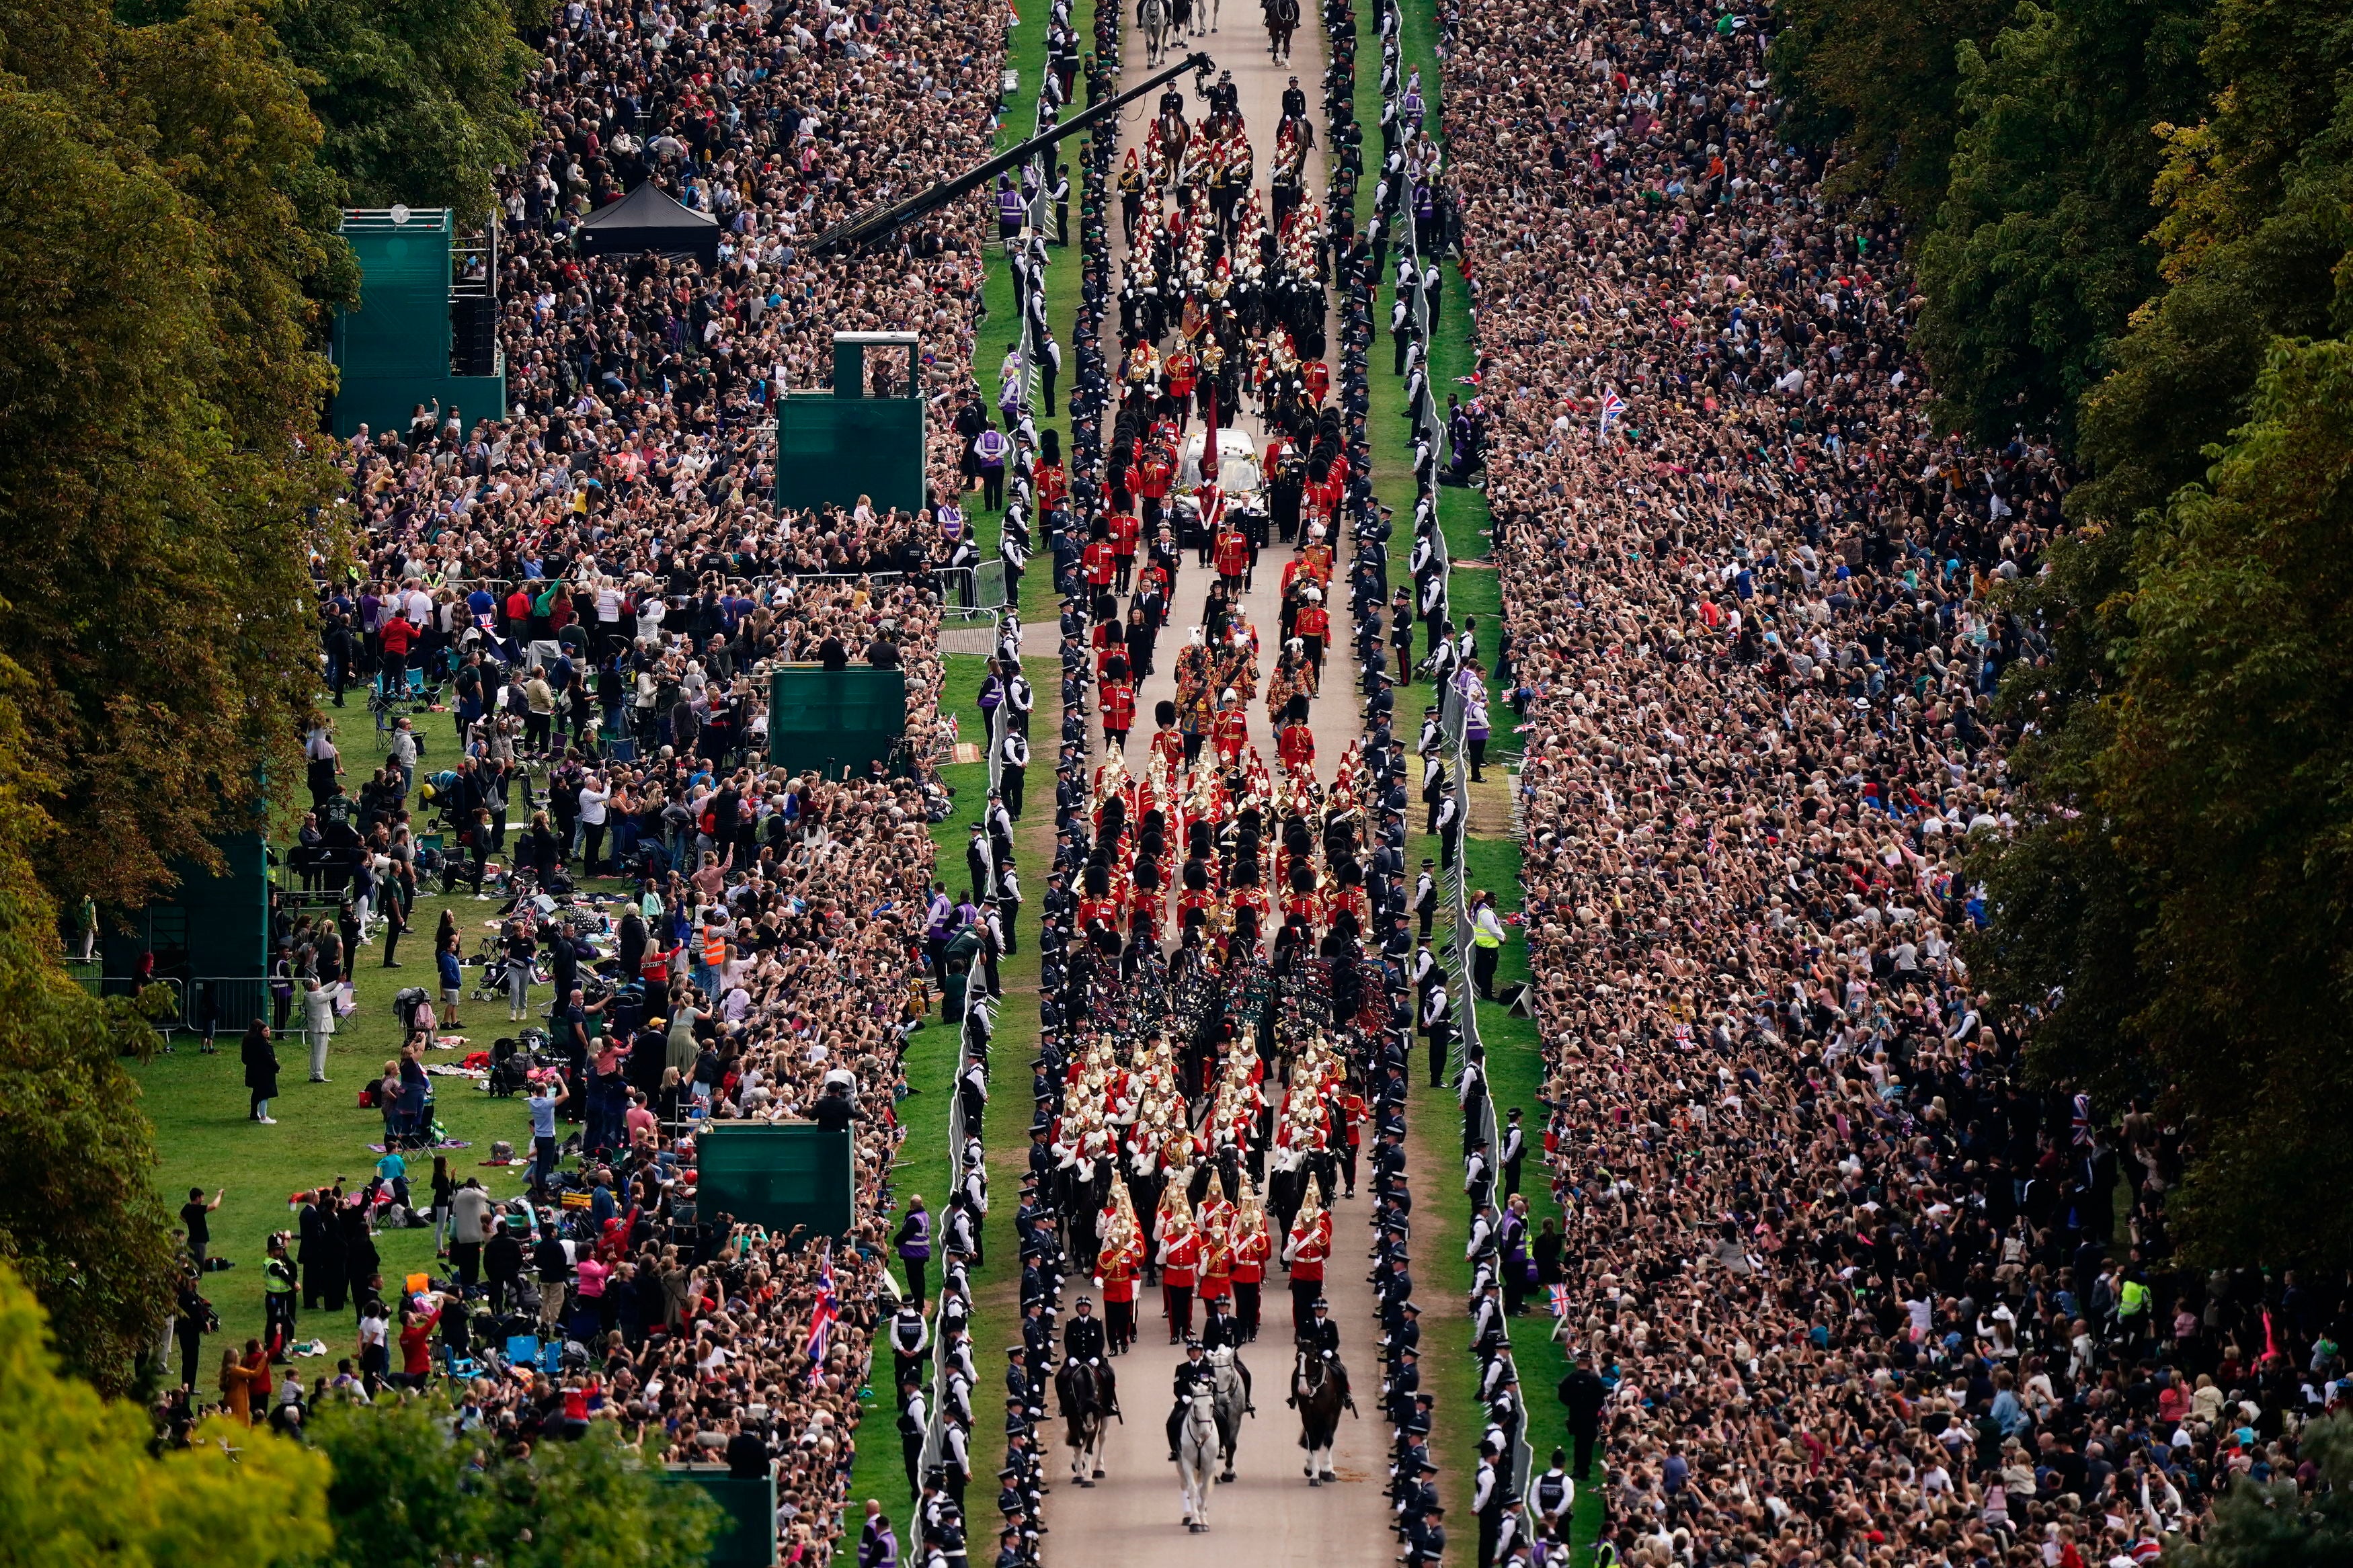 The procession travels down the Long Walk towards Windsor Castle